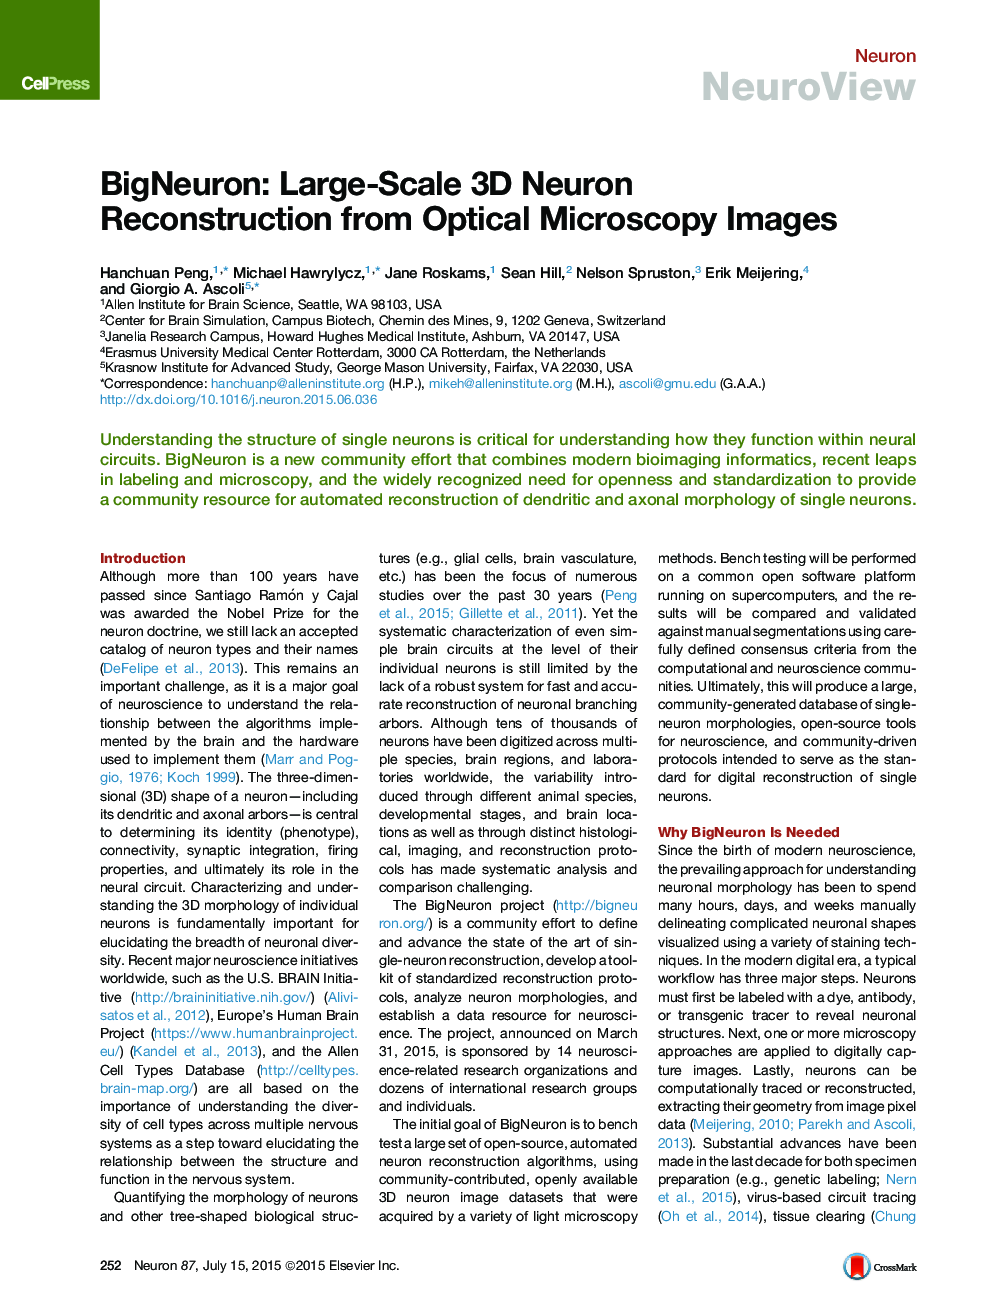 BigNeuron: Large-Scale 3D Neuron Reconstruction from Optical Microscopy Images